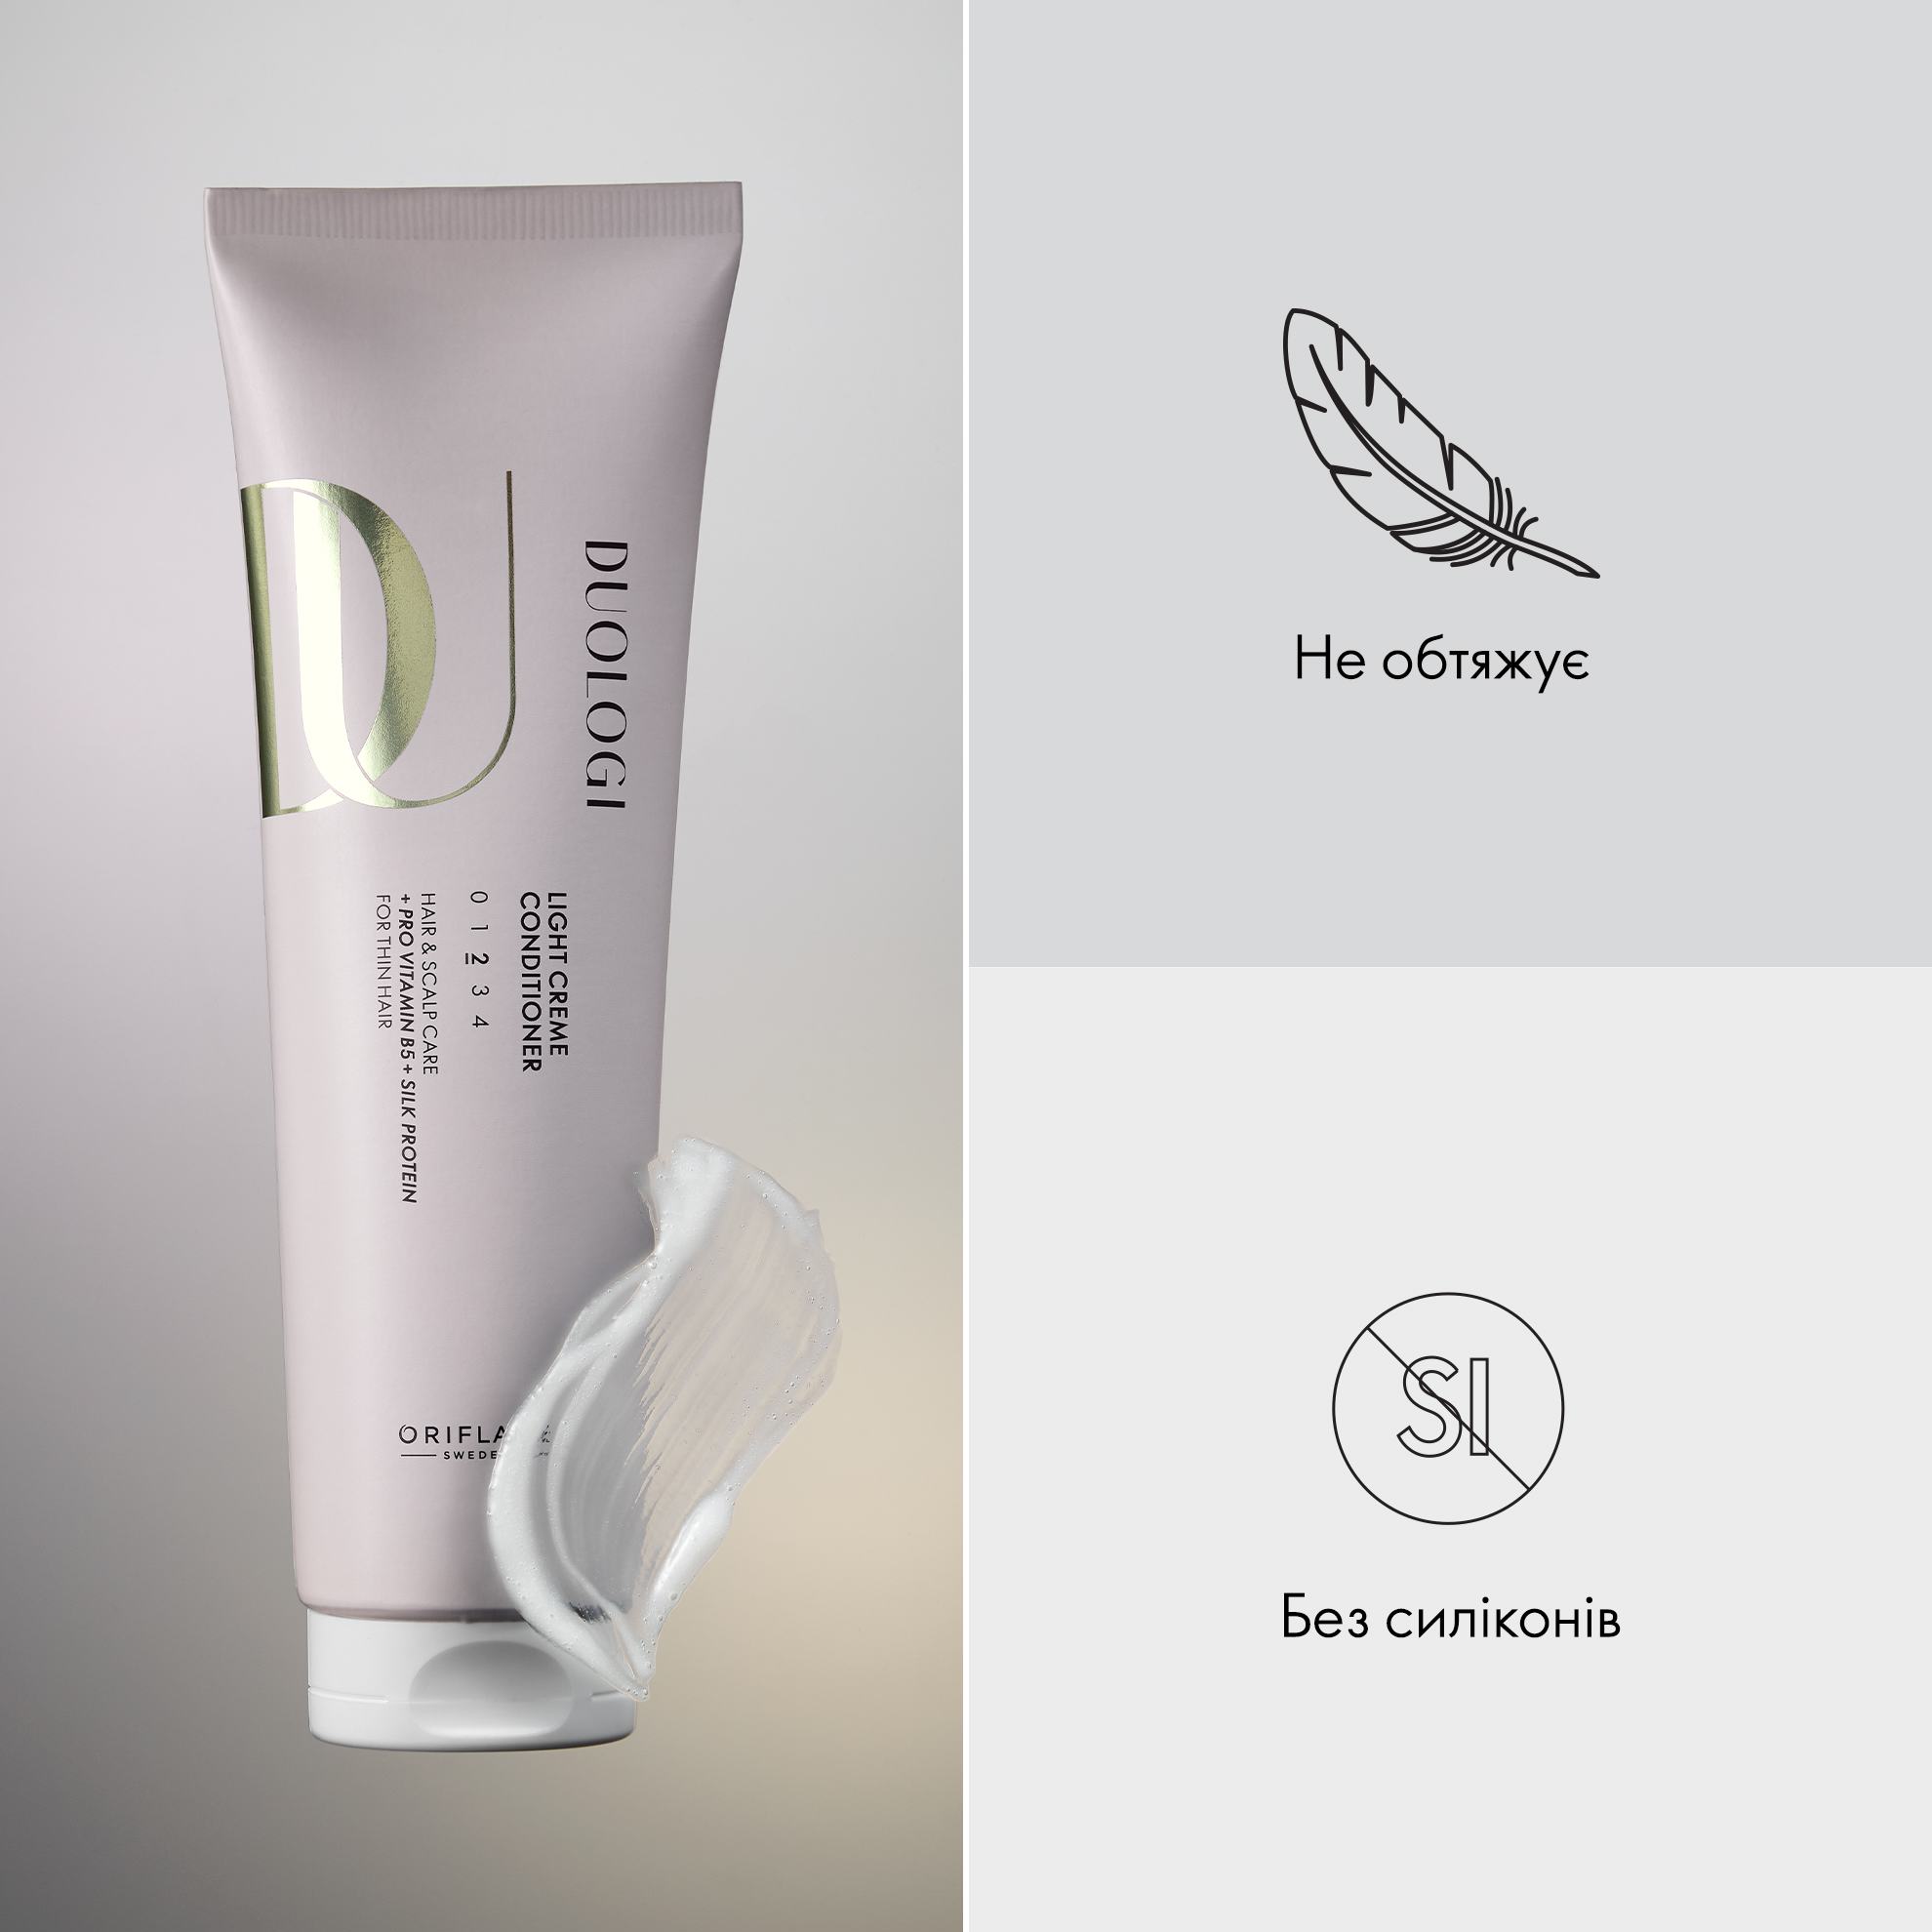 https://media-cdn.oriflame.com/productImage?externalMediaId=product-management-media%2fProducts%2f44961%2fUA%2f44961_3.png&id=17921116&version=1